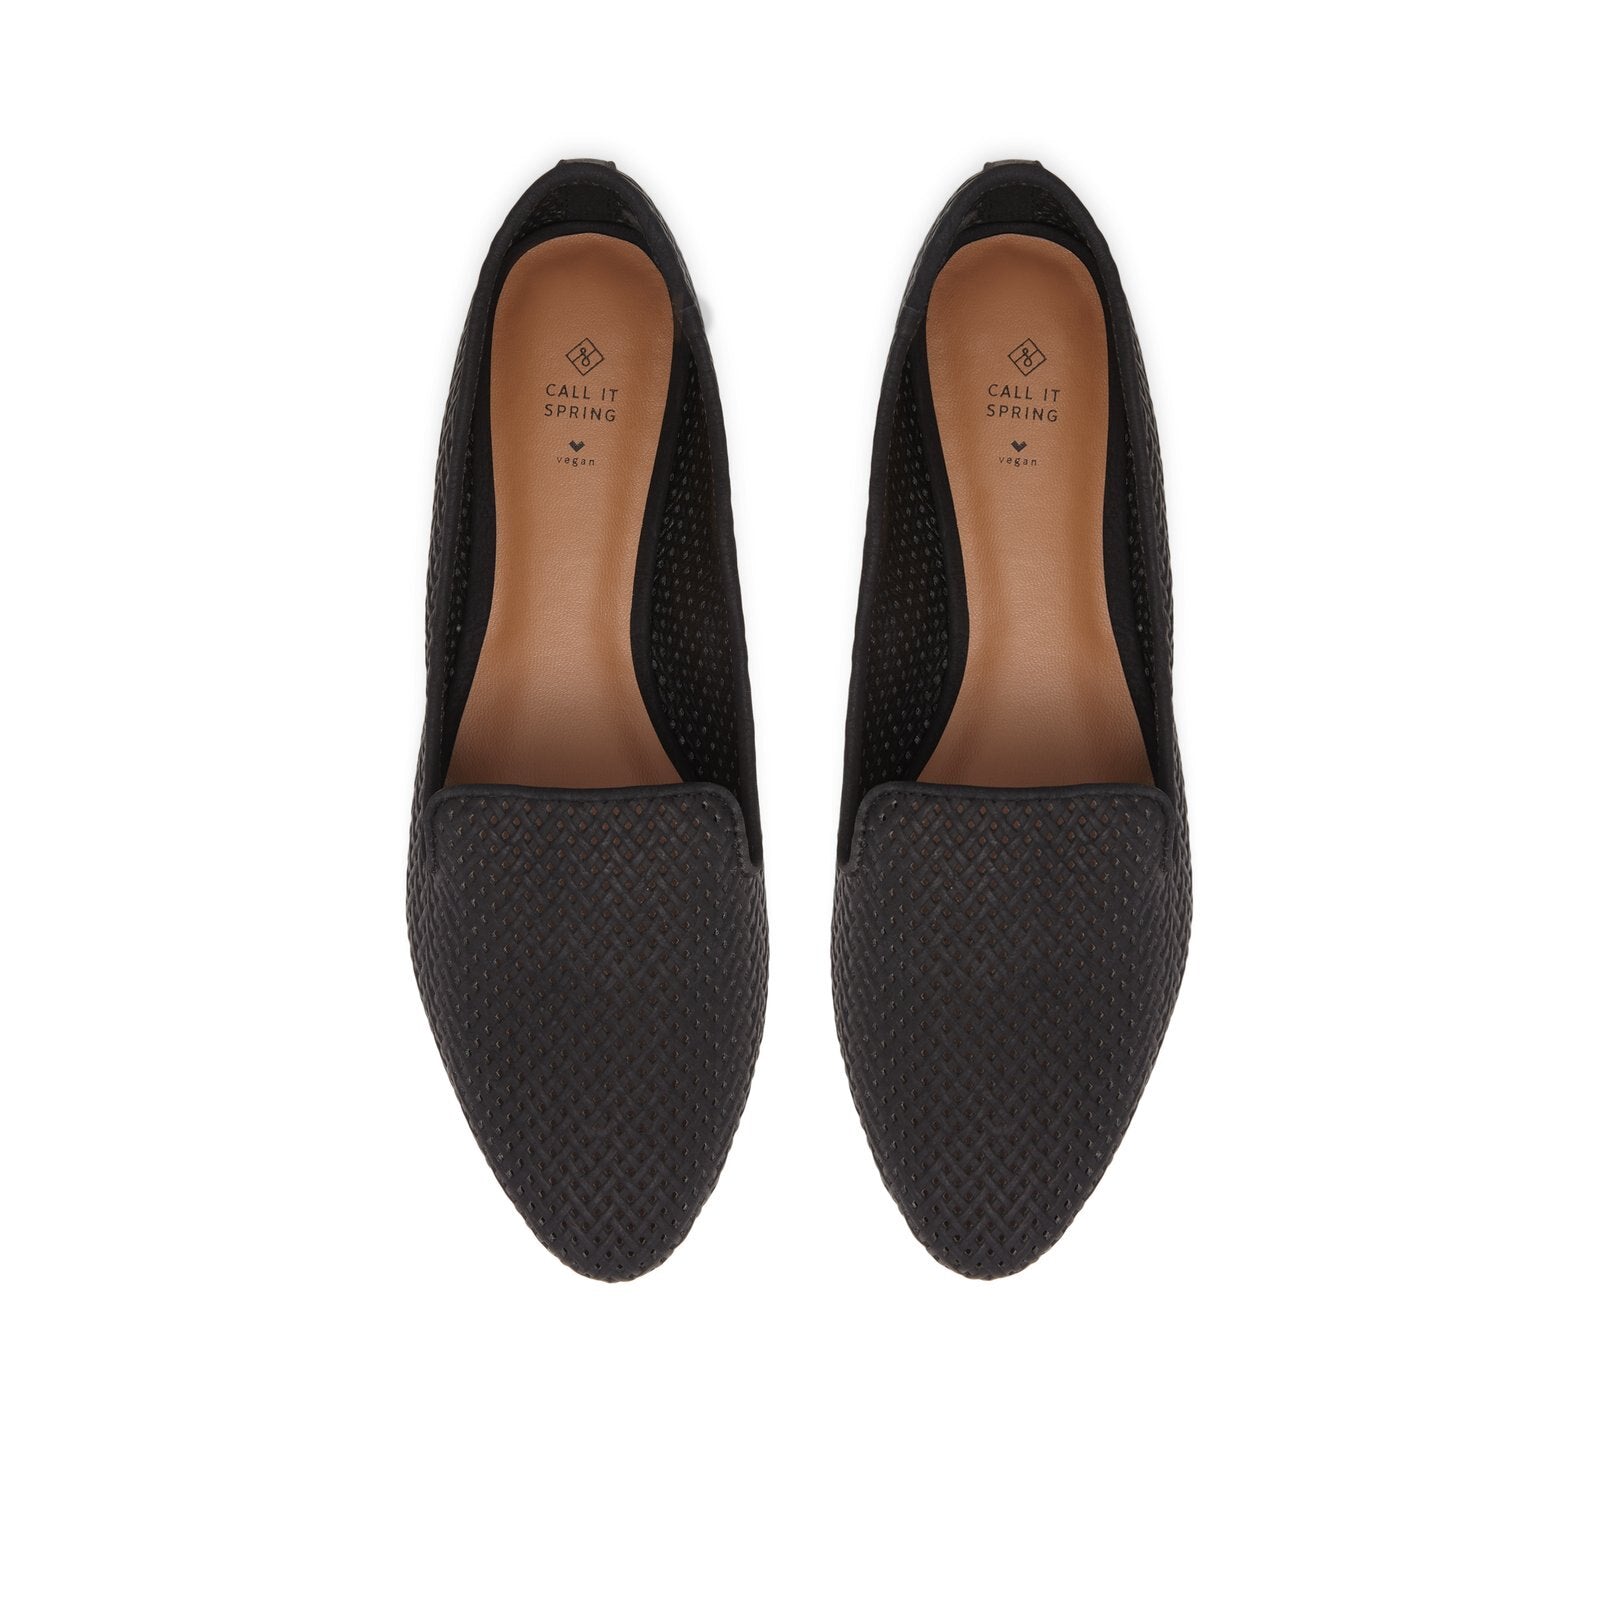 Marianah / Loafers Women Shoes - Black - CALL IT SPRING KSA